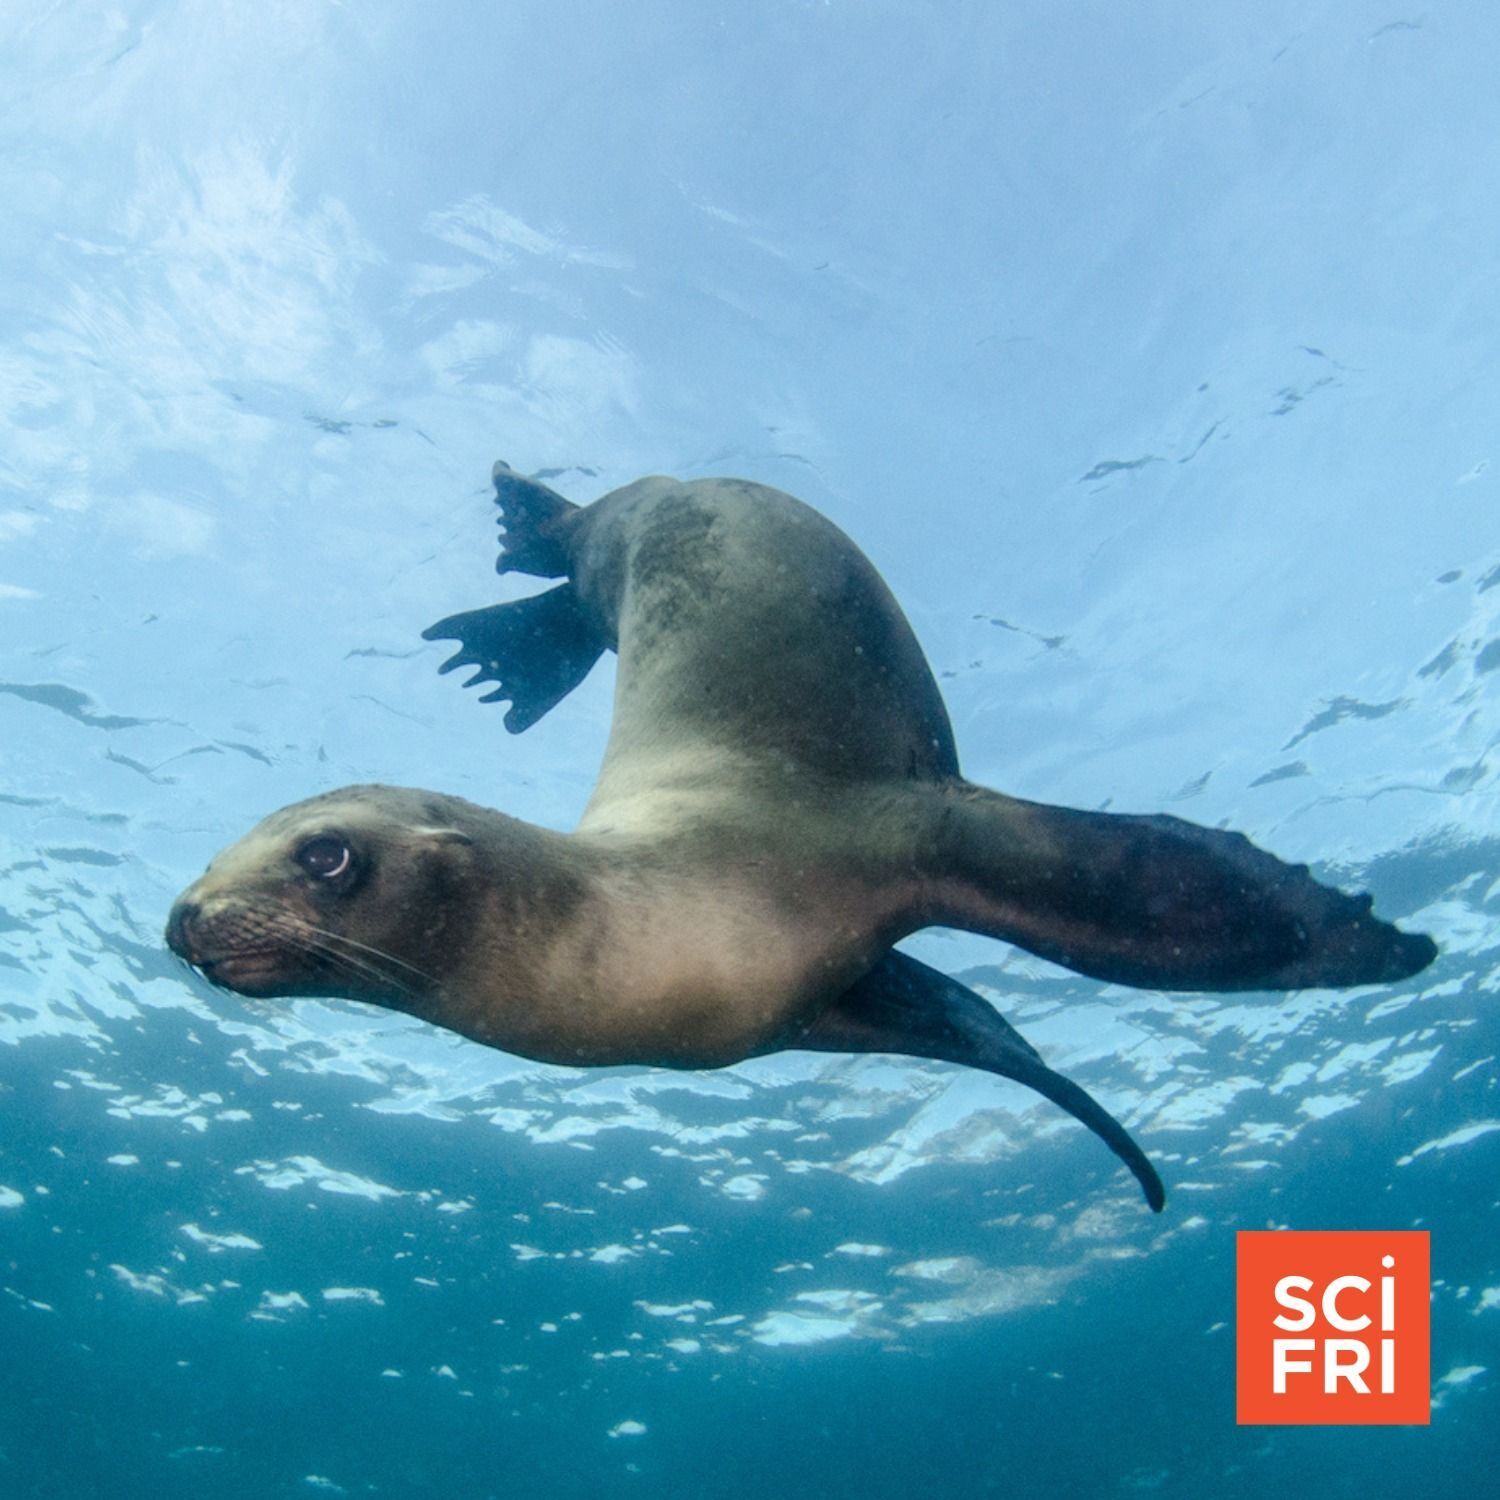 736: Swimming Sea Lions Teach Engineers About Fluid Dynamics